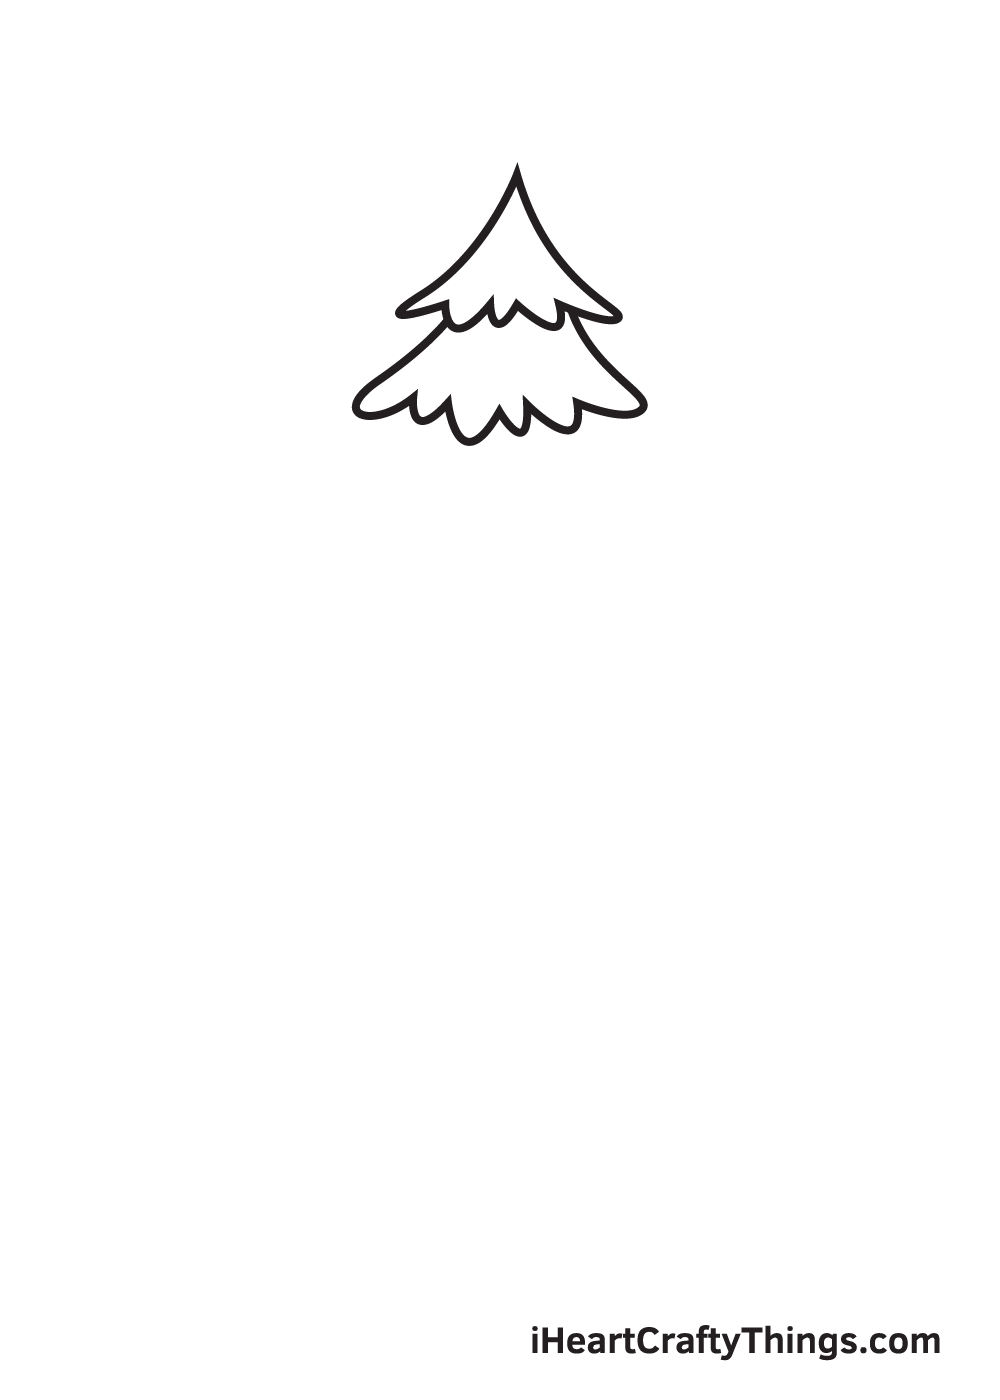 Pine tree drawing step by step  images ideas